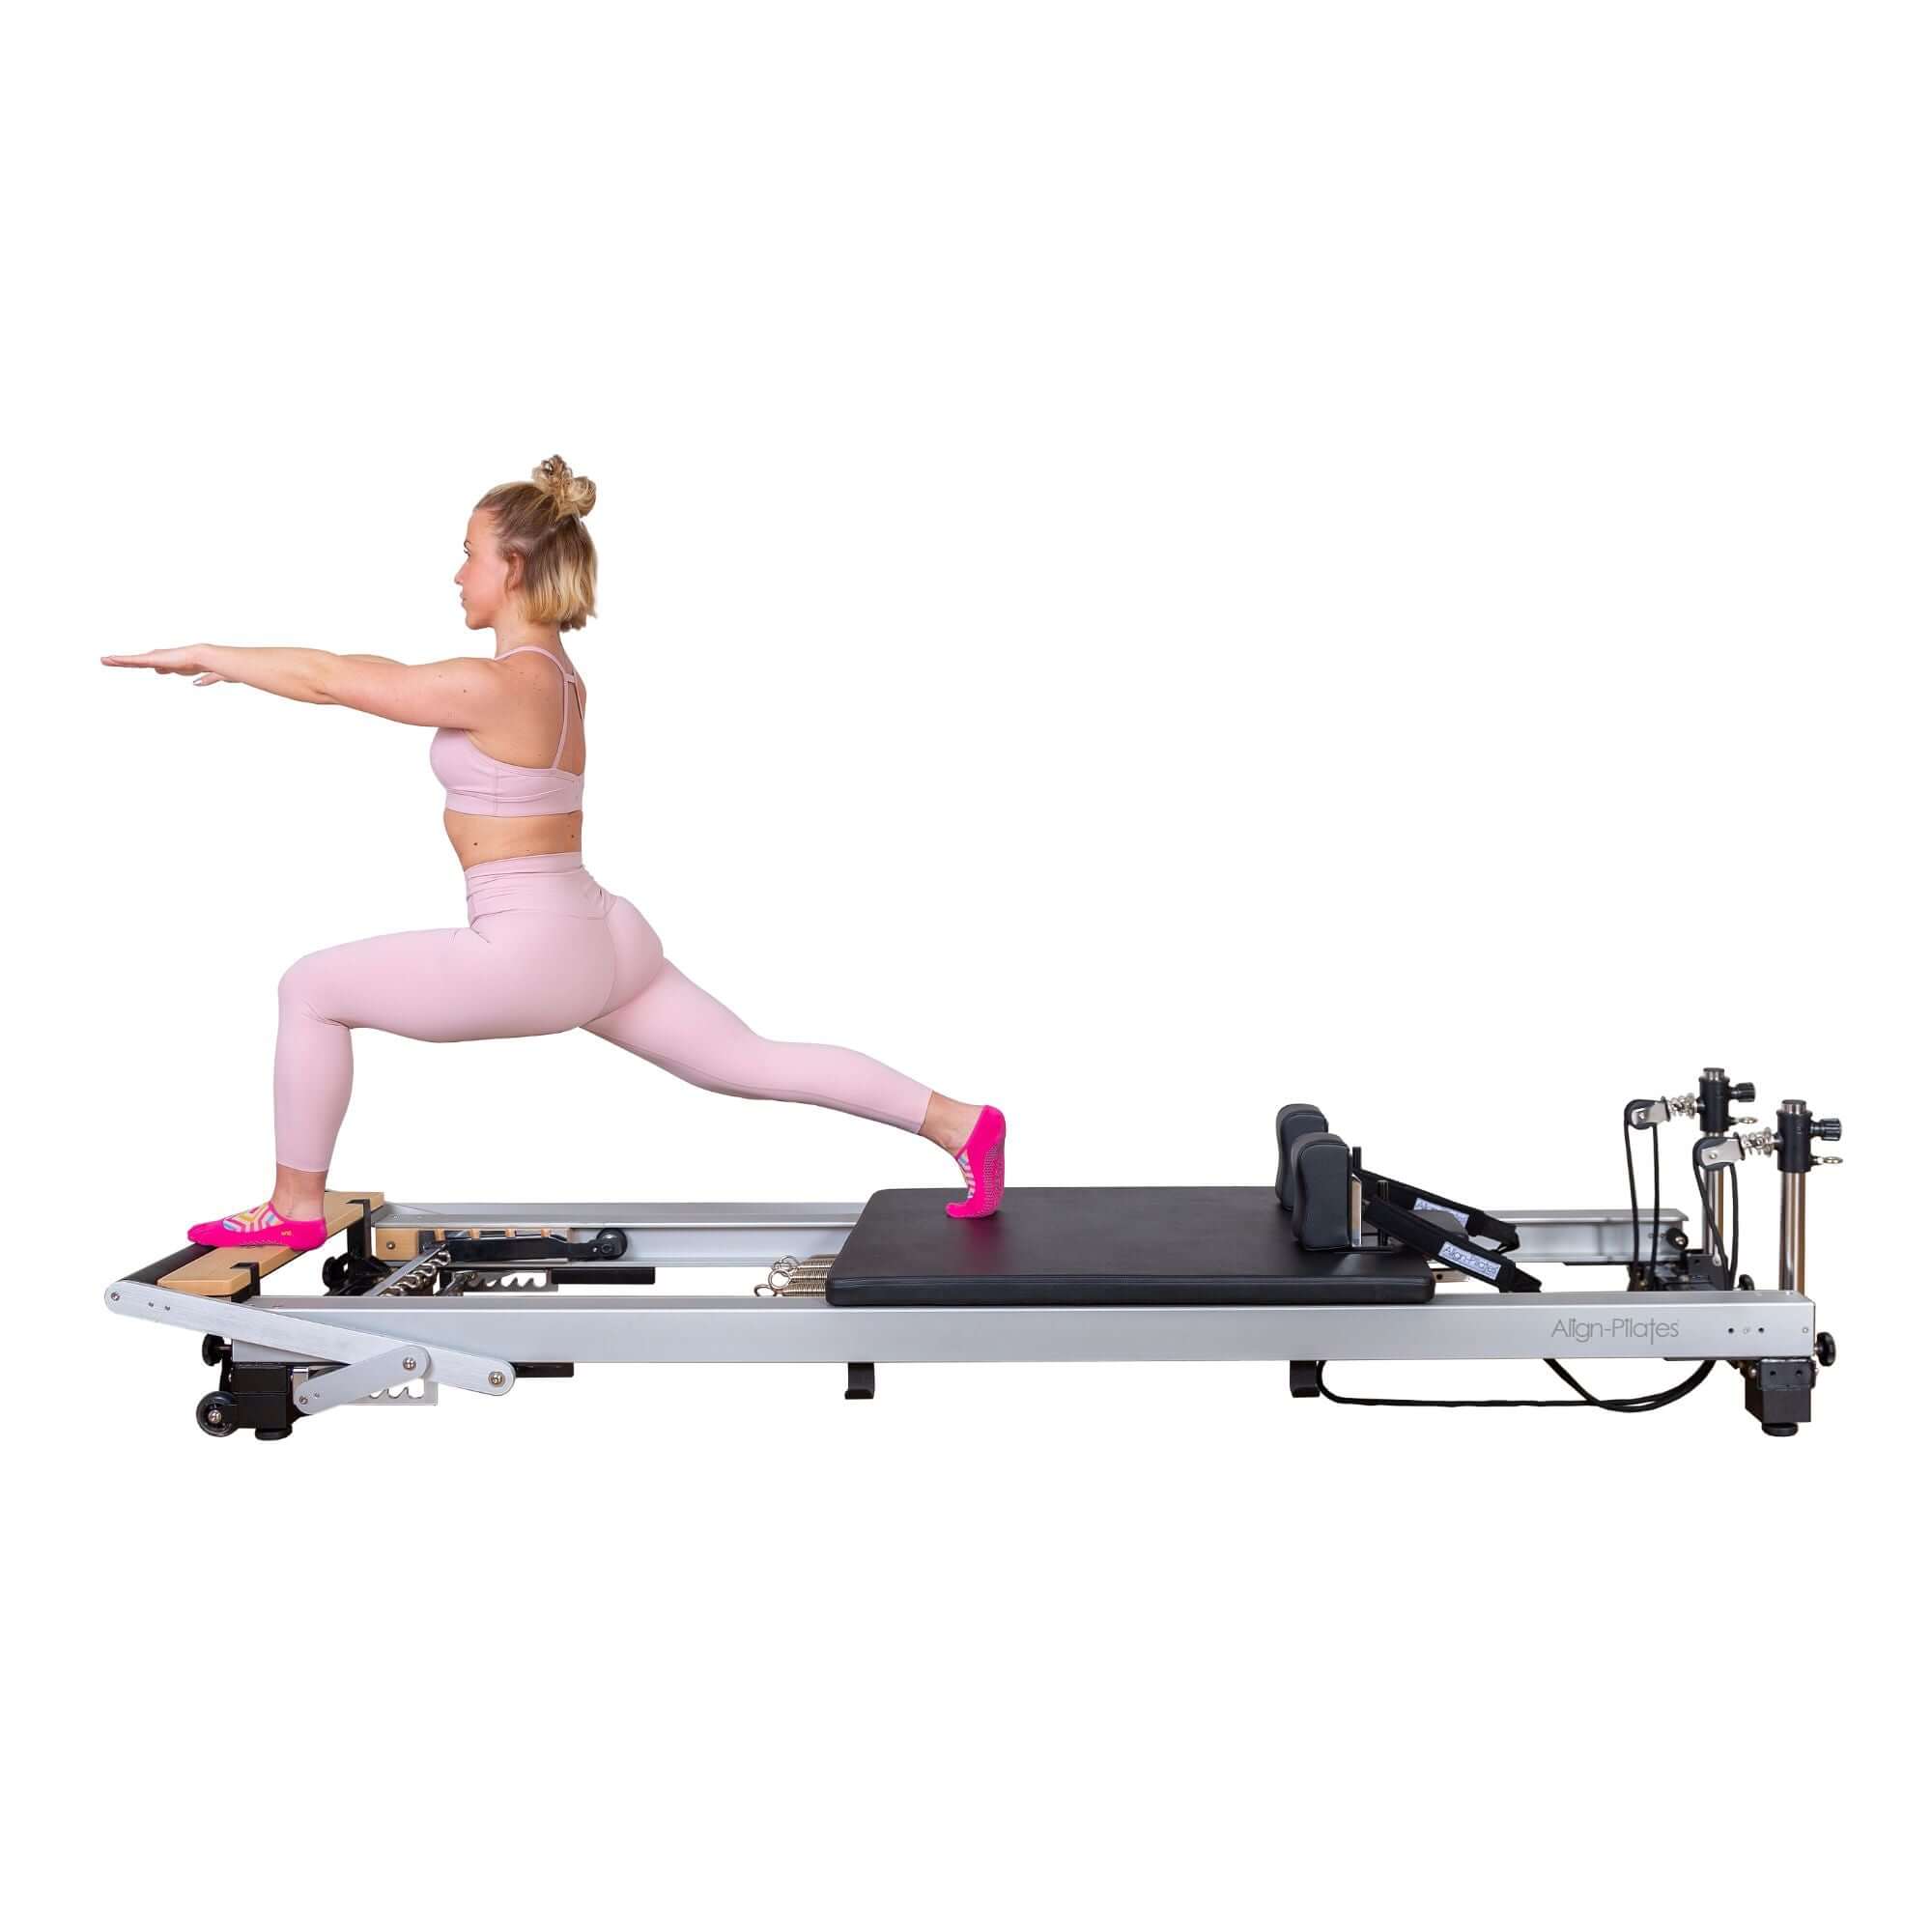 Top view of the Align A8 Reformer, focusing on the comfortable padding and spacious carriage.